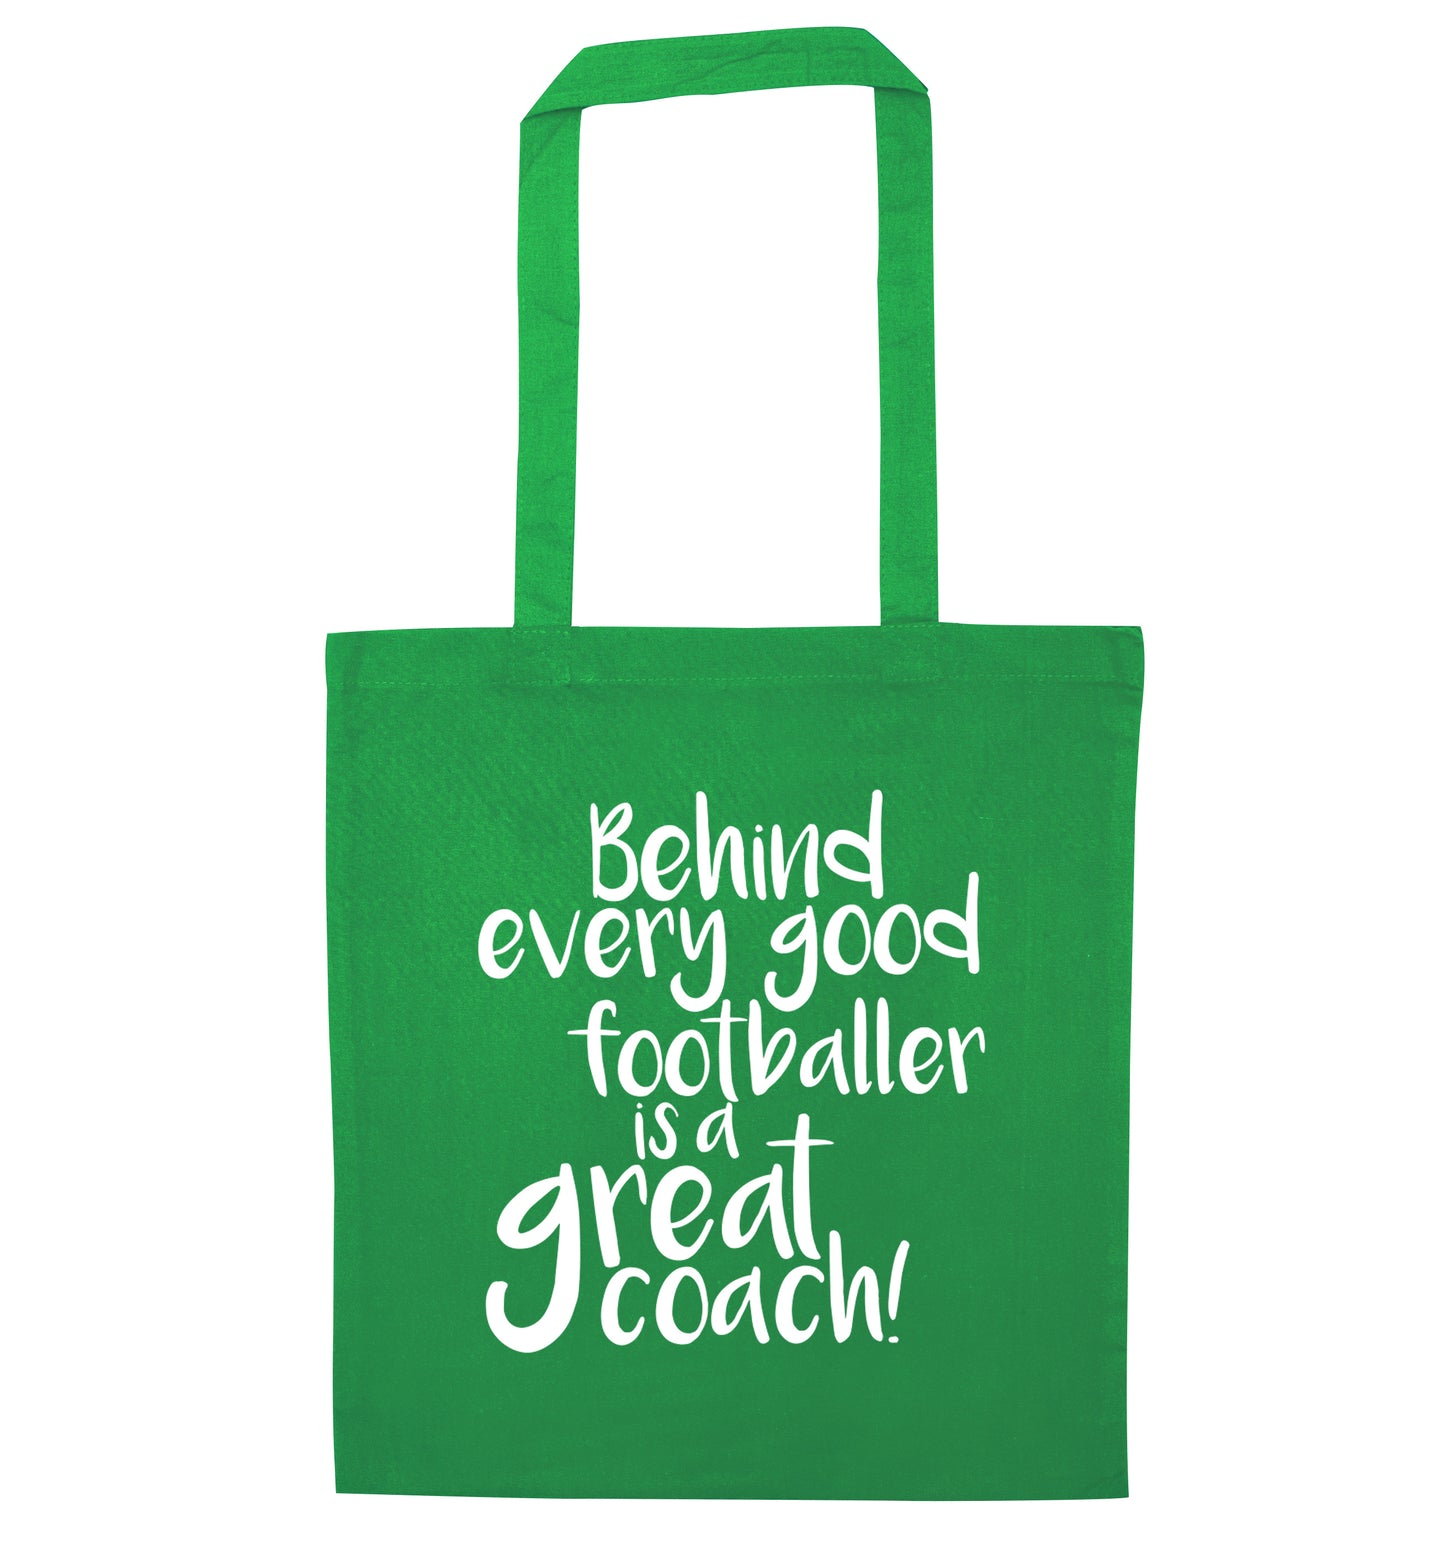 Behind every good footballer is a great coach! green tote bag